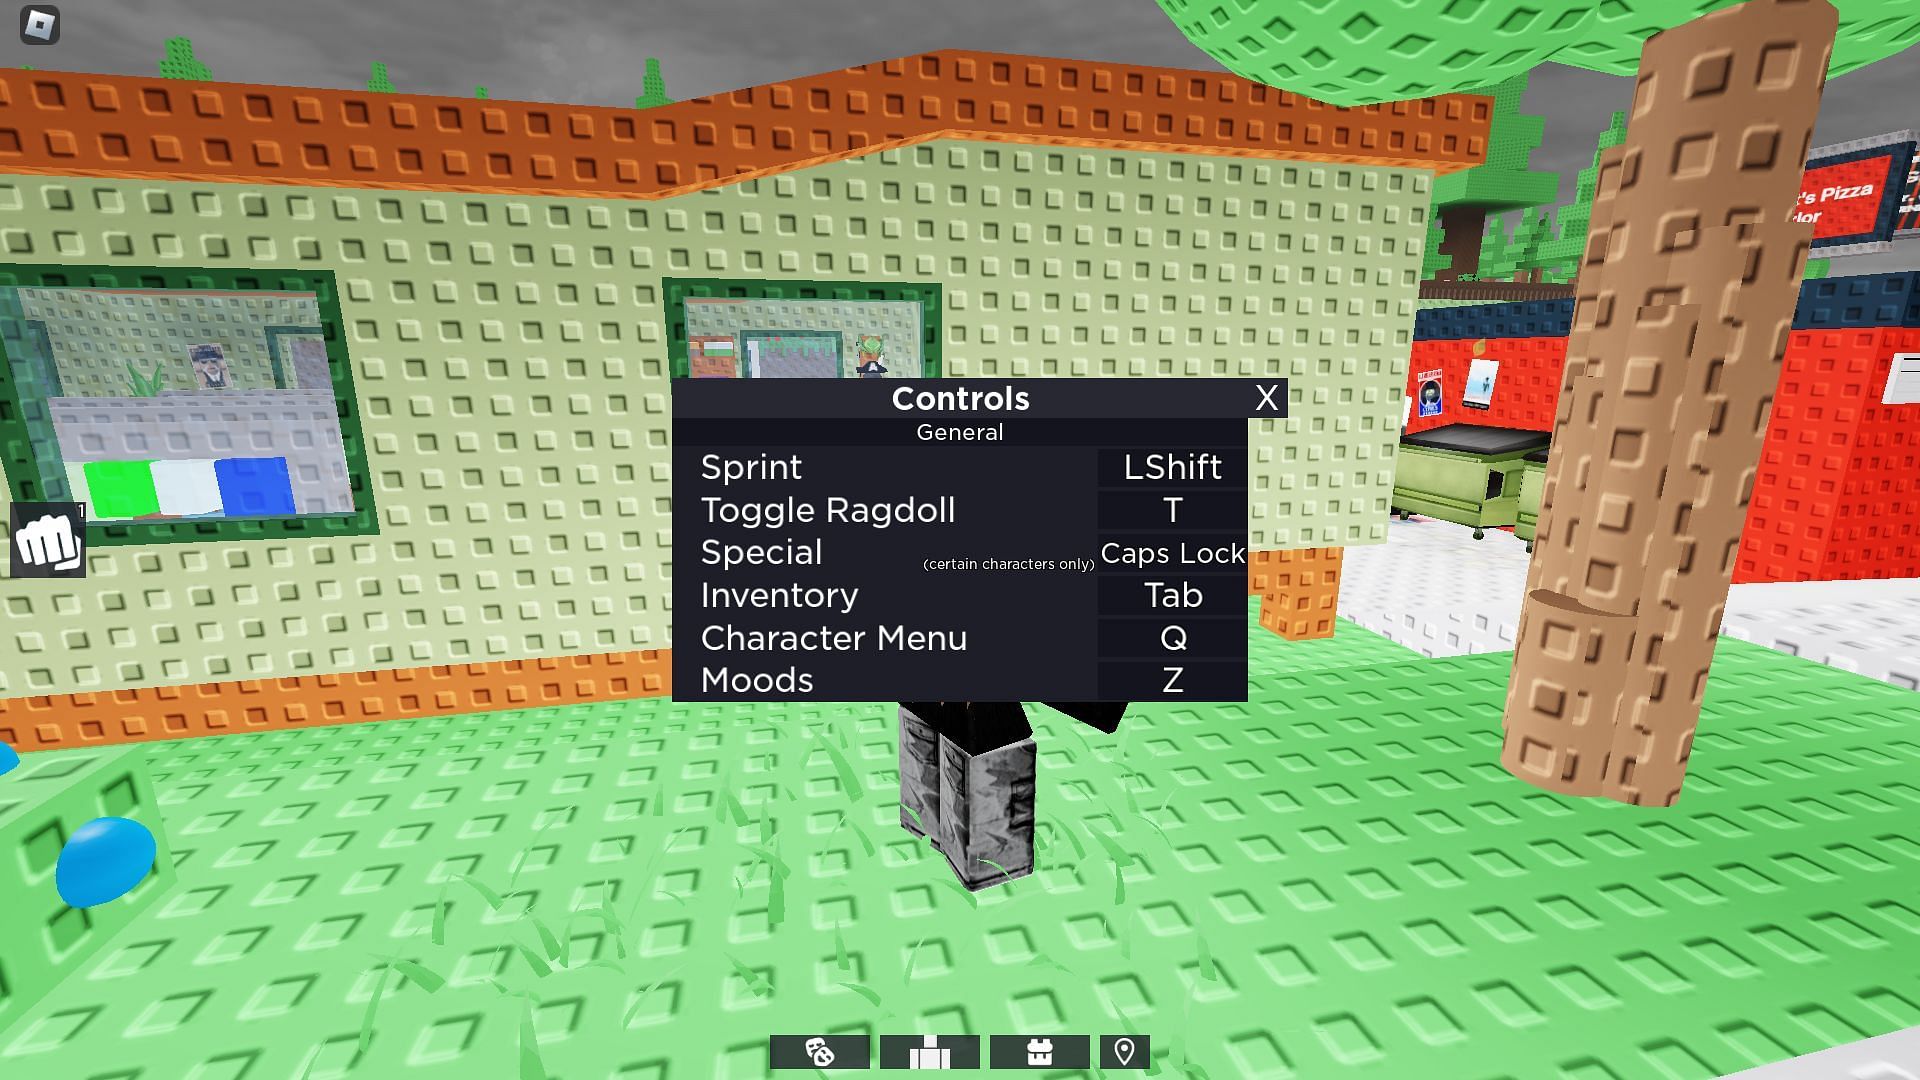 In-game controls guide (Image via Roblox)